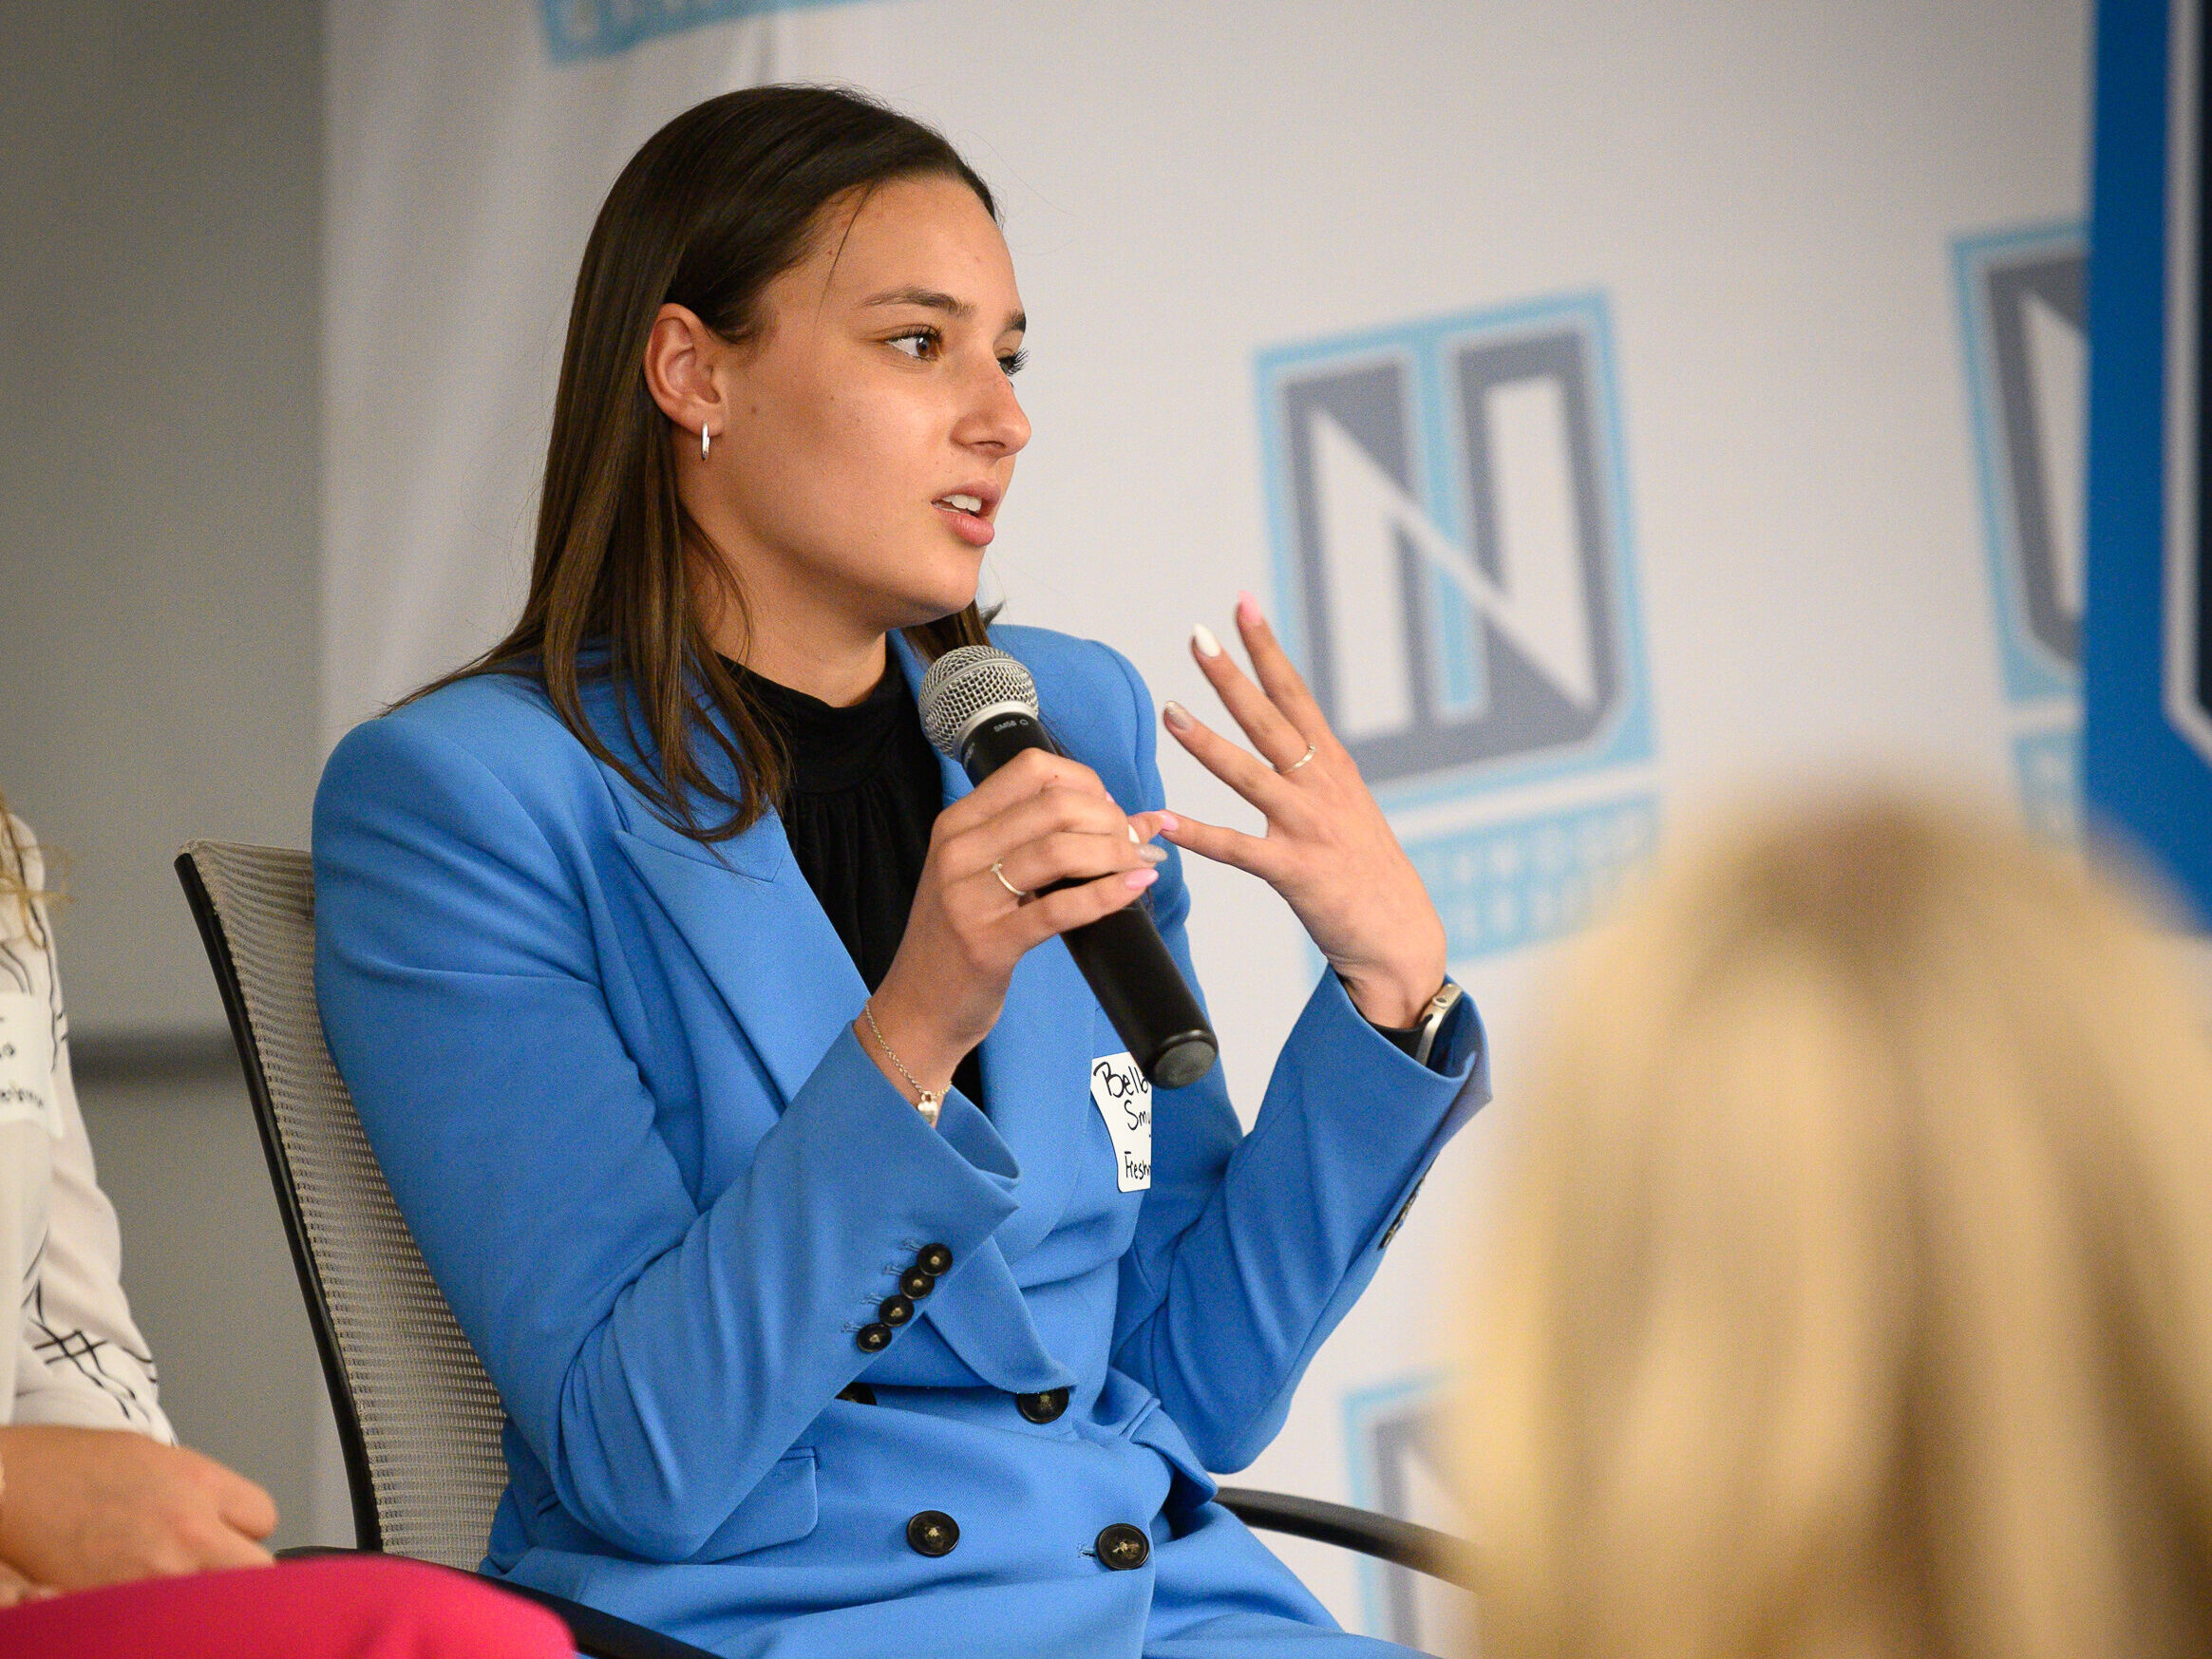 Northwood student in a blue suit speaking into a microphone at an event